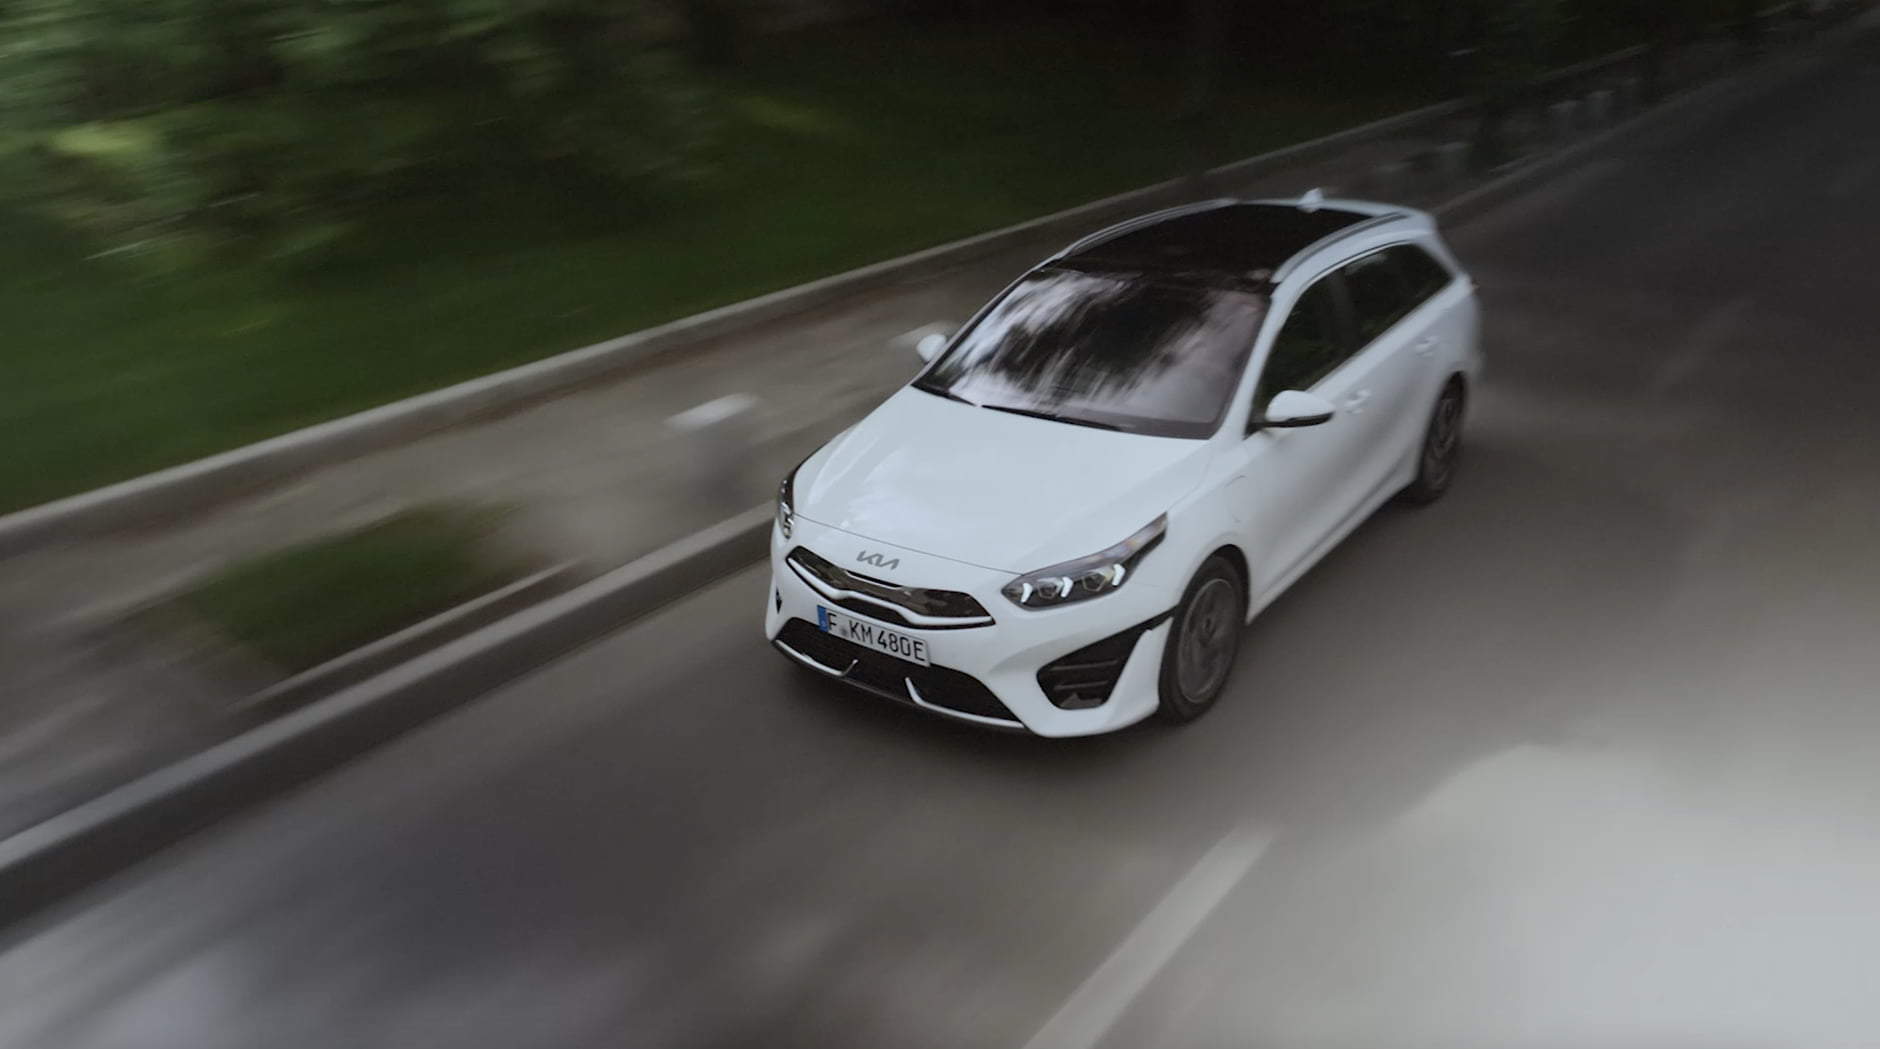 The new Kia Ceed | Connectivity that inspires